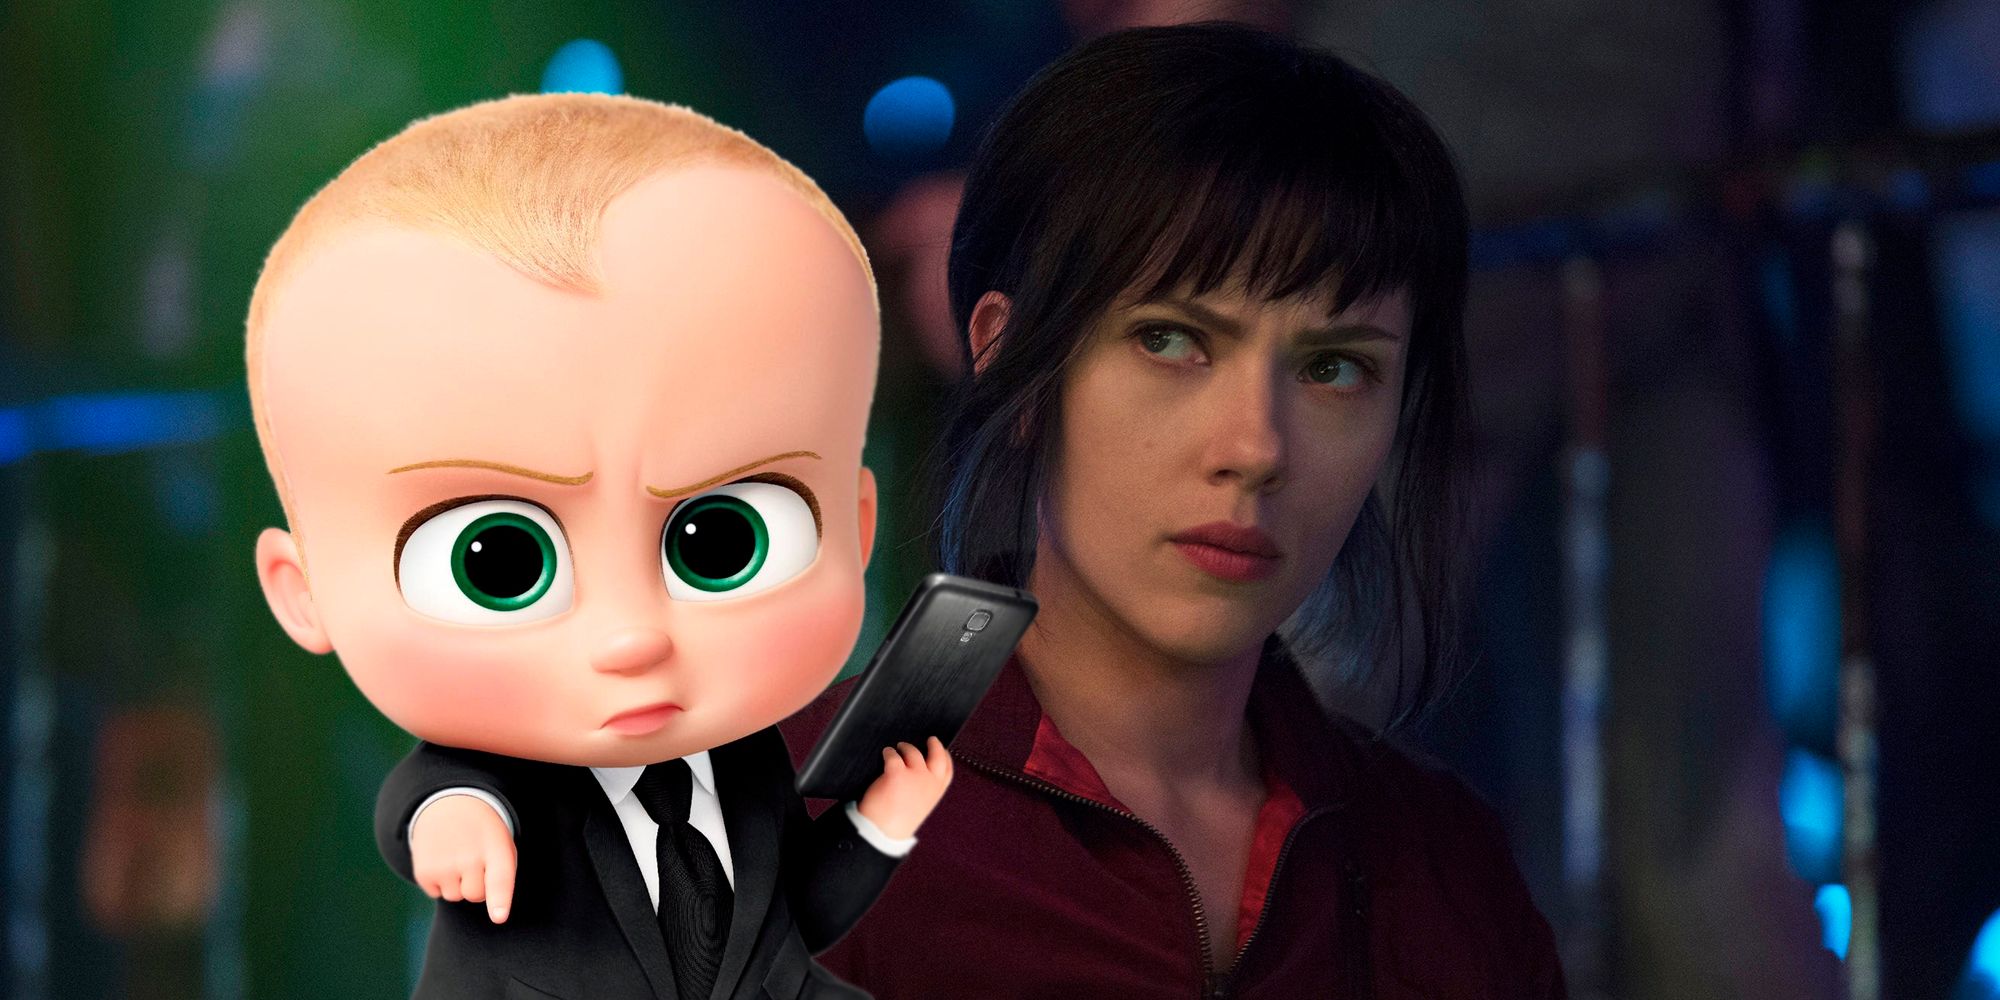 Ghost in the Shell vs. The Boss Baby